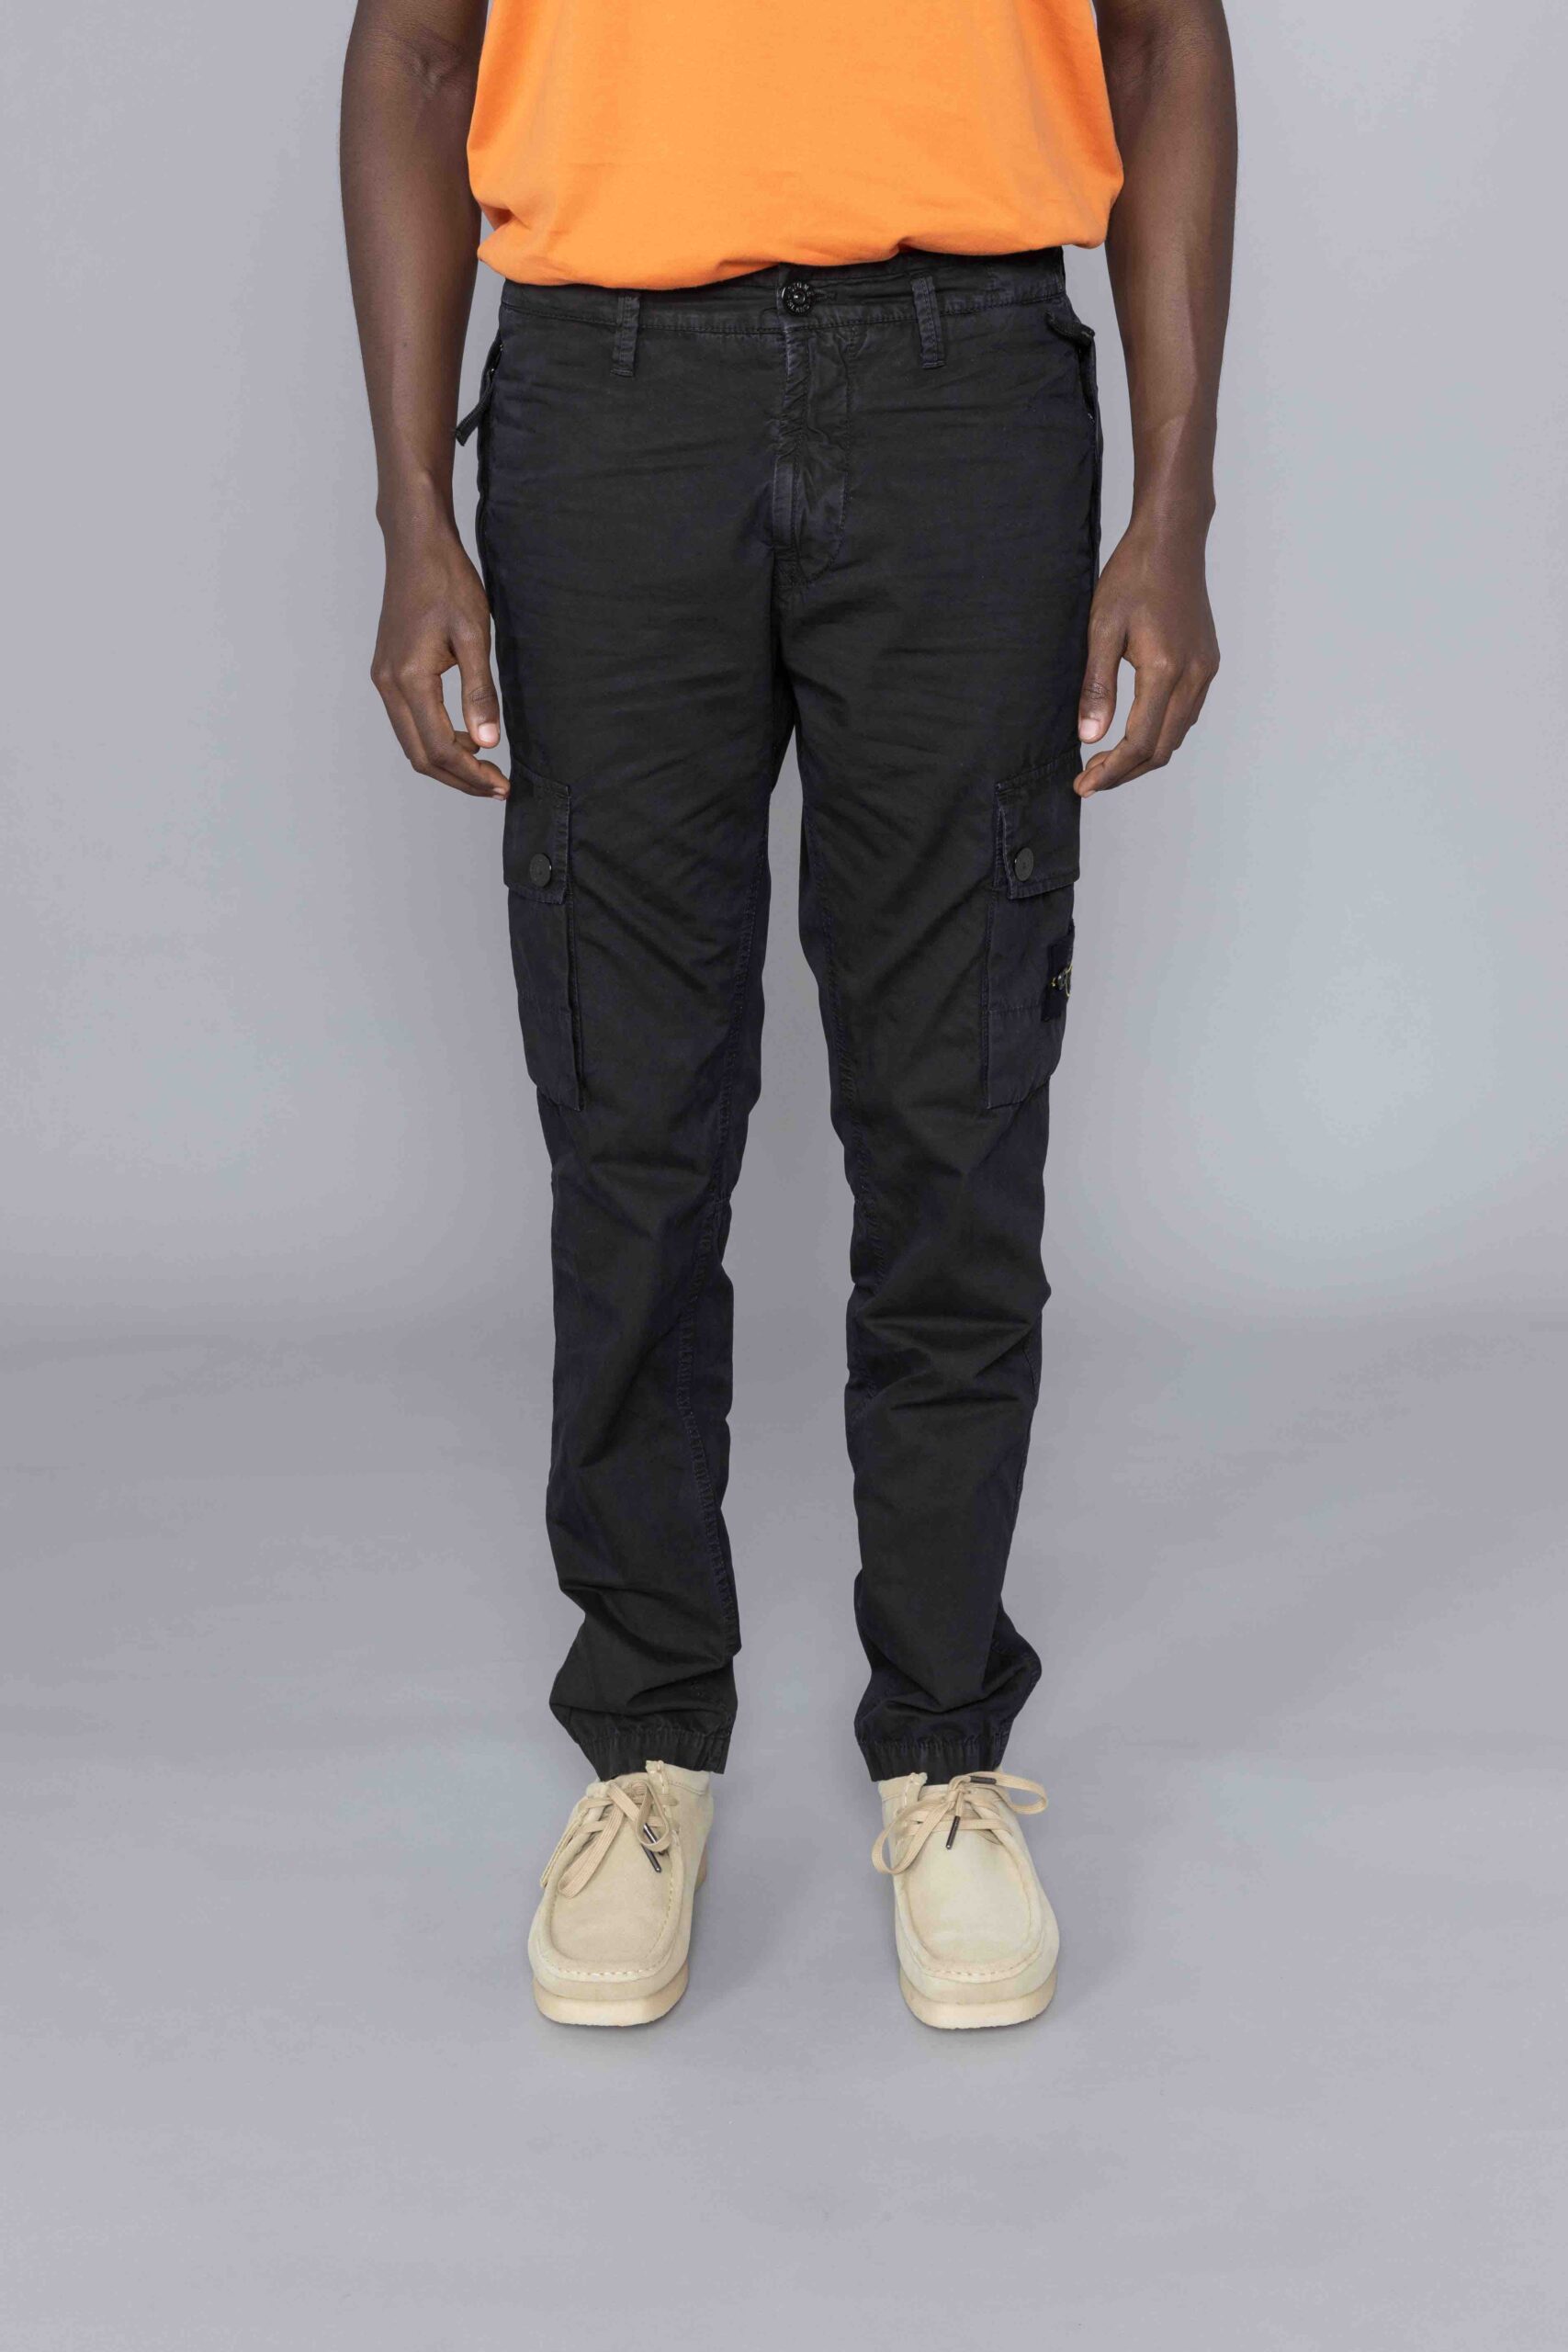 Stone Island Old Effect Cargo Pants 303WA • Centreville Store